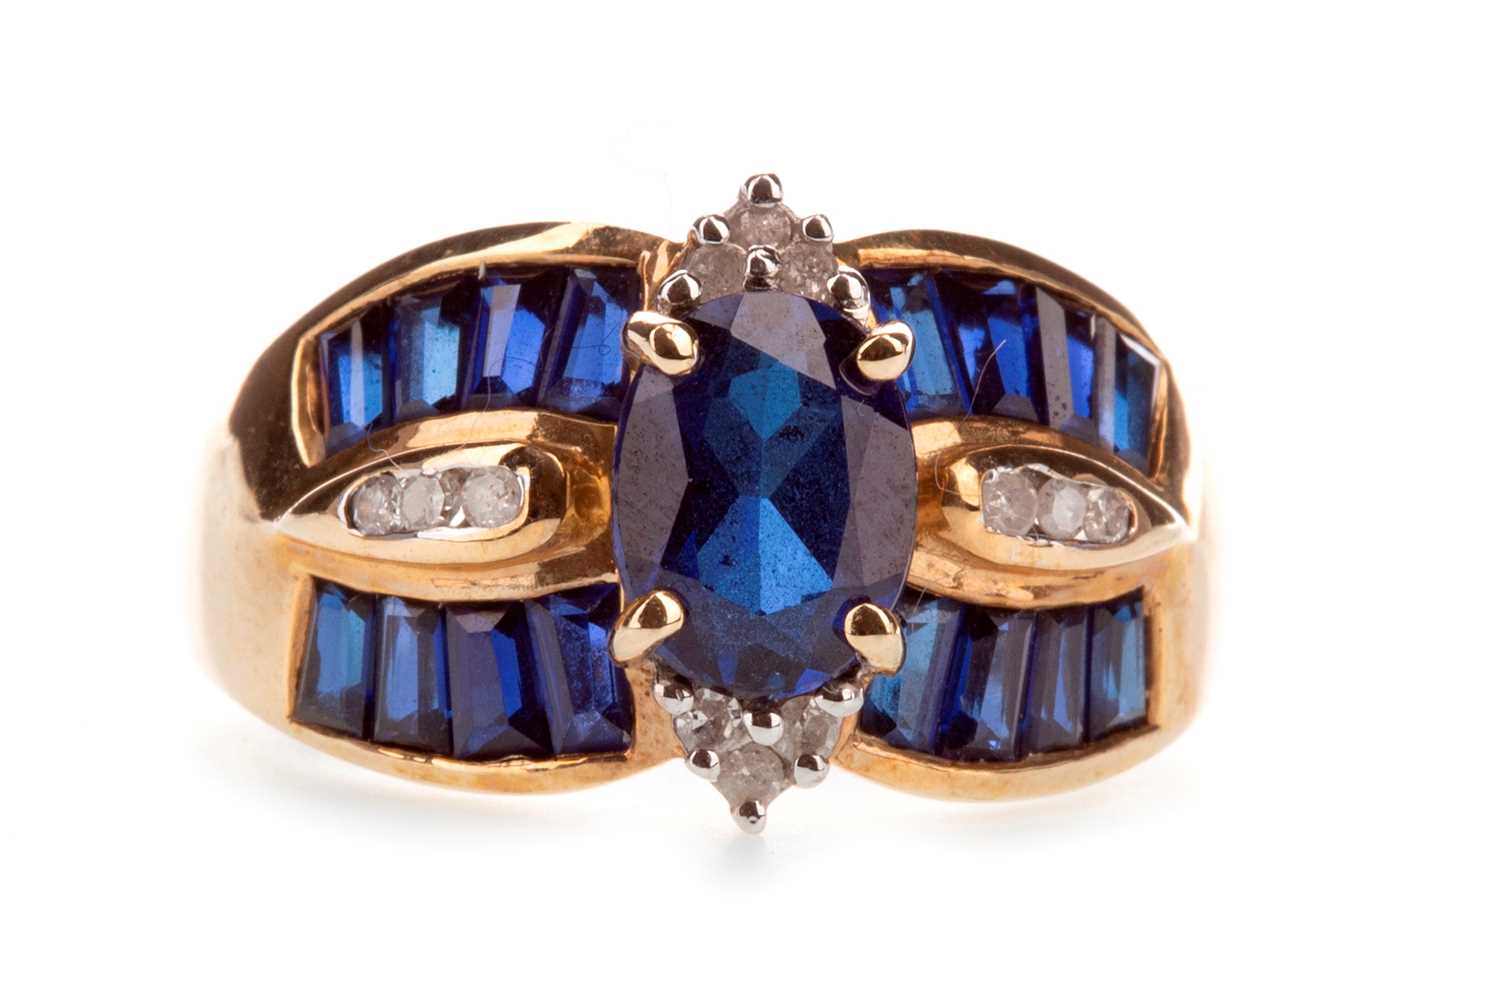 Lot 490 - A BLUE GEM AND DIAMOND RING